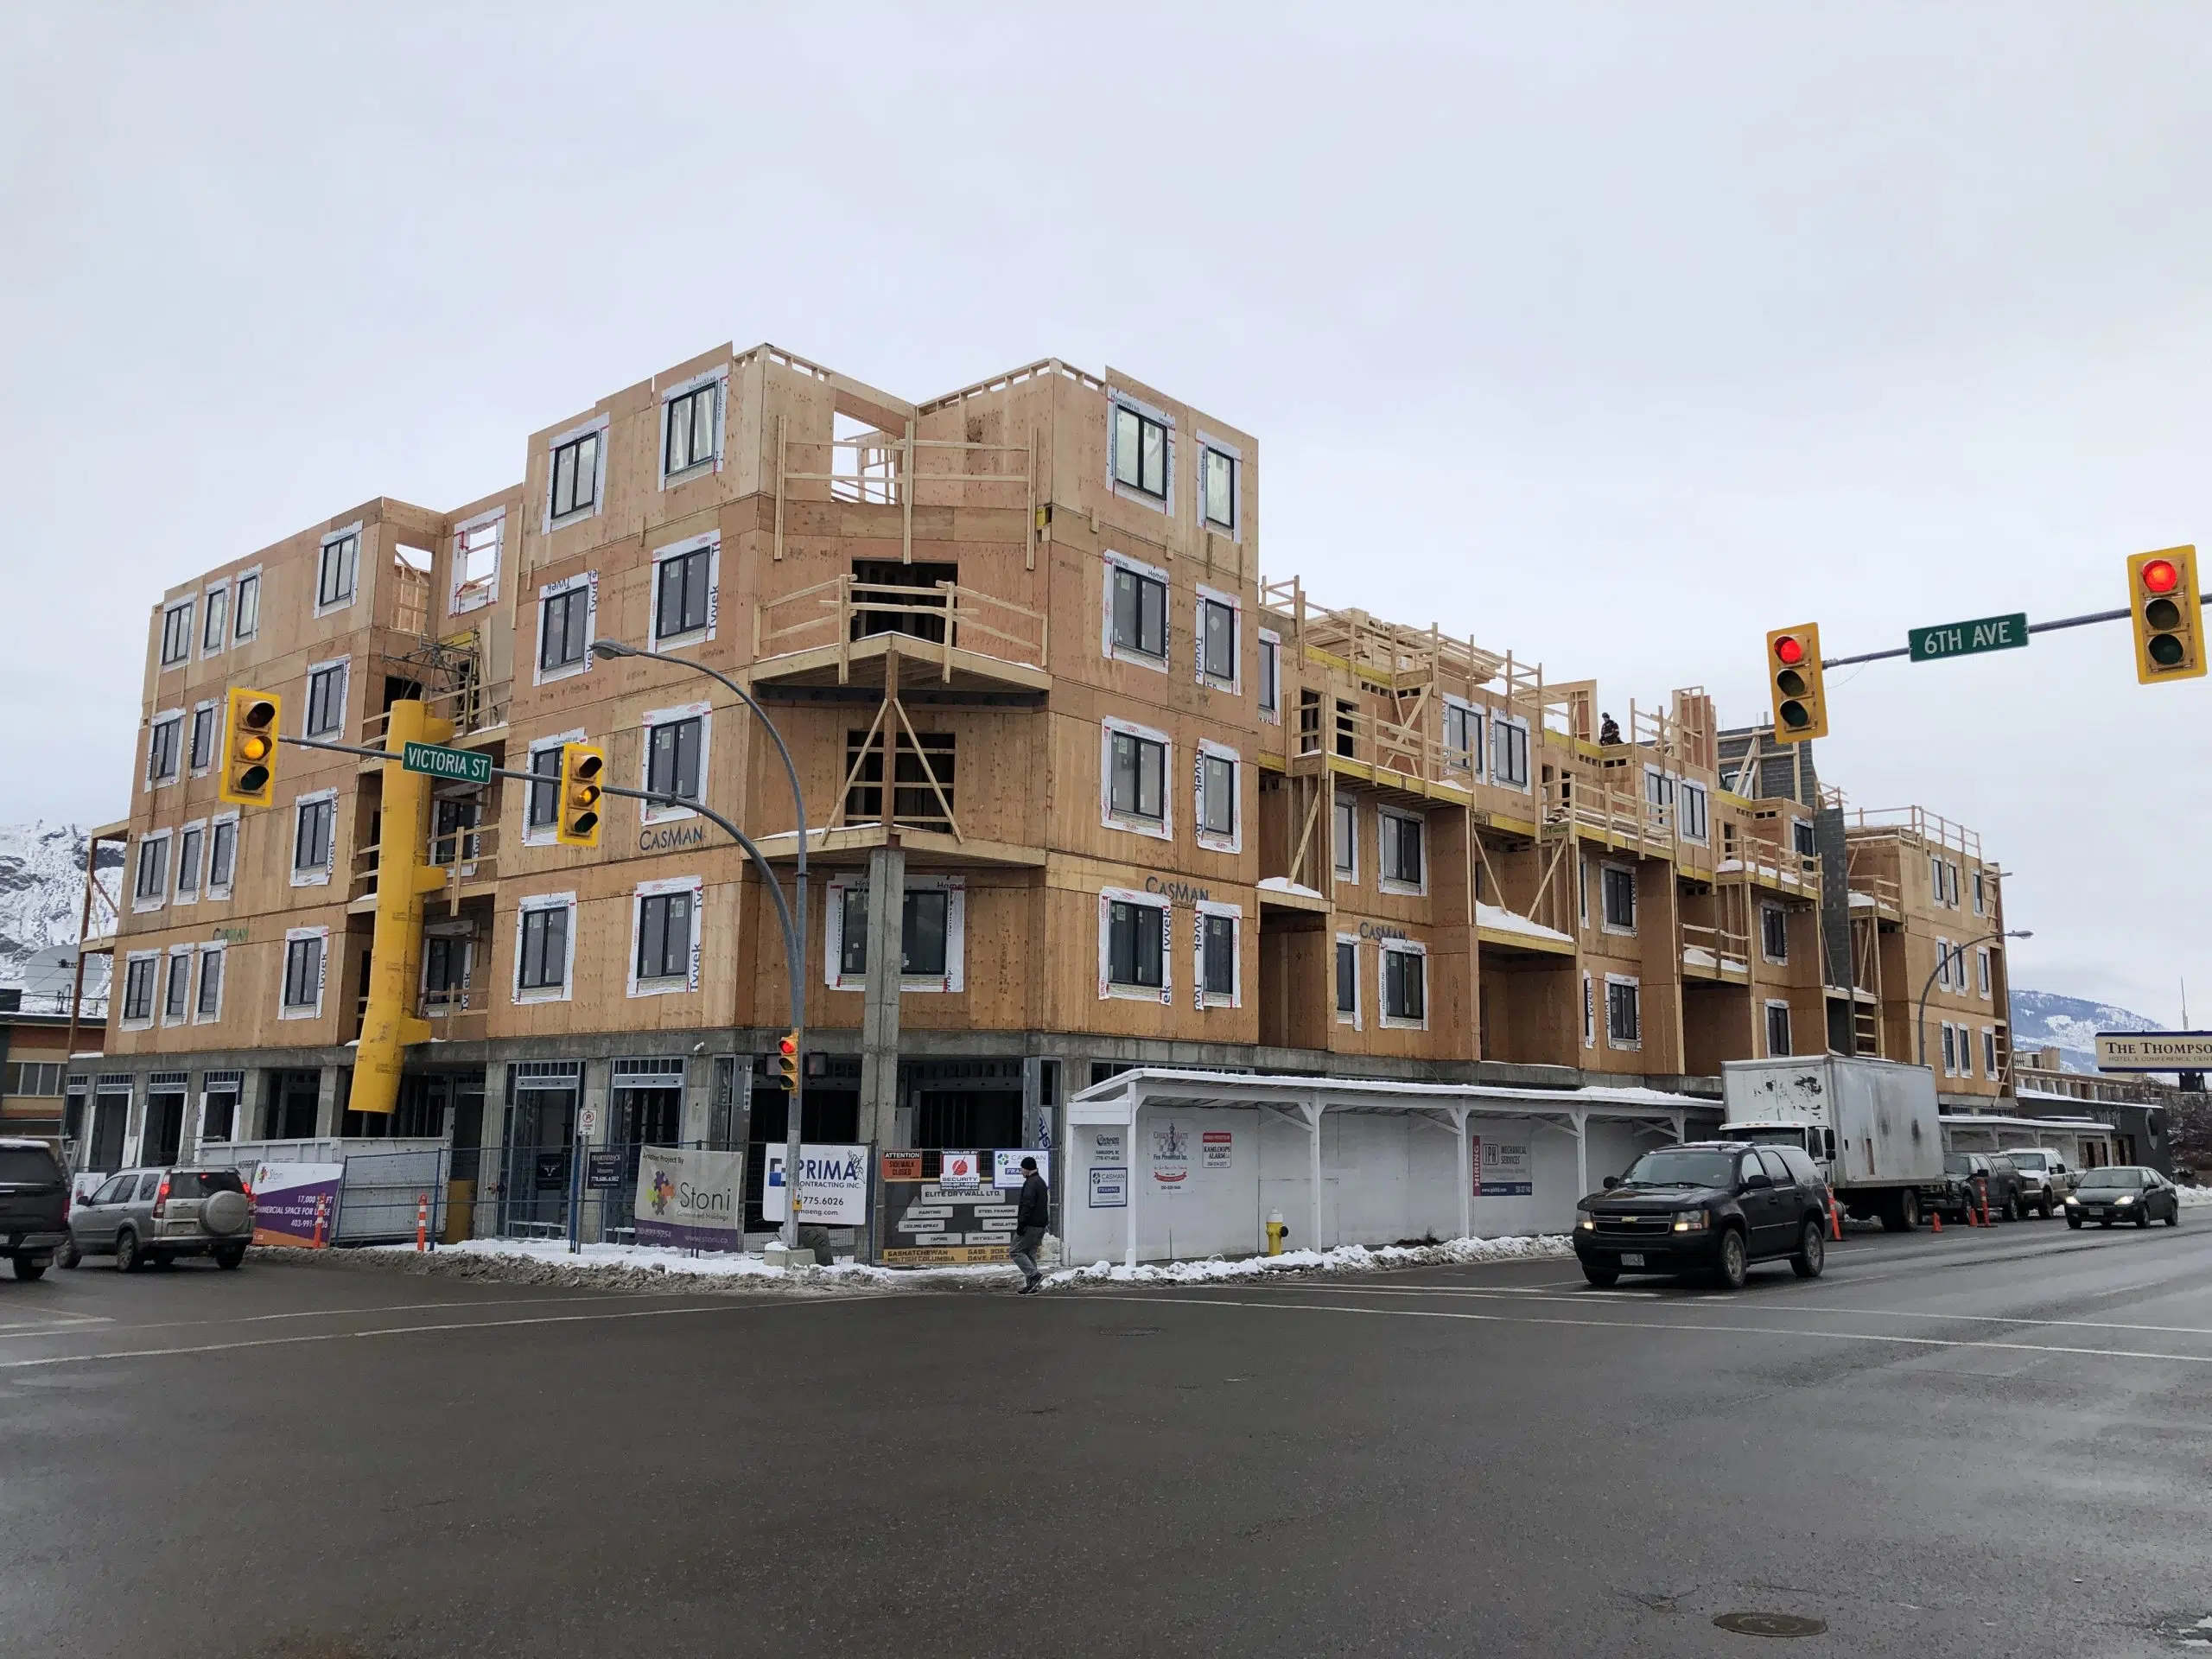 New tower with affordable seniors housing on schedule for summer 2021 completion